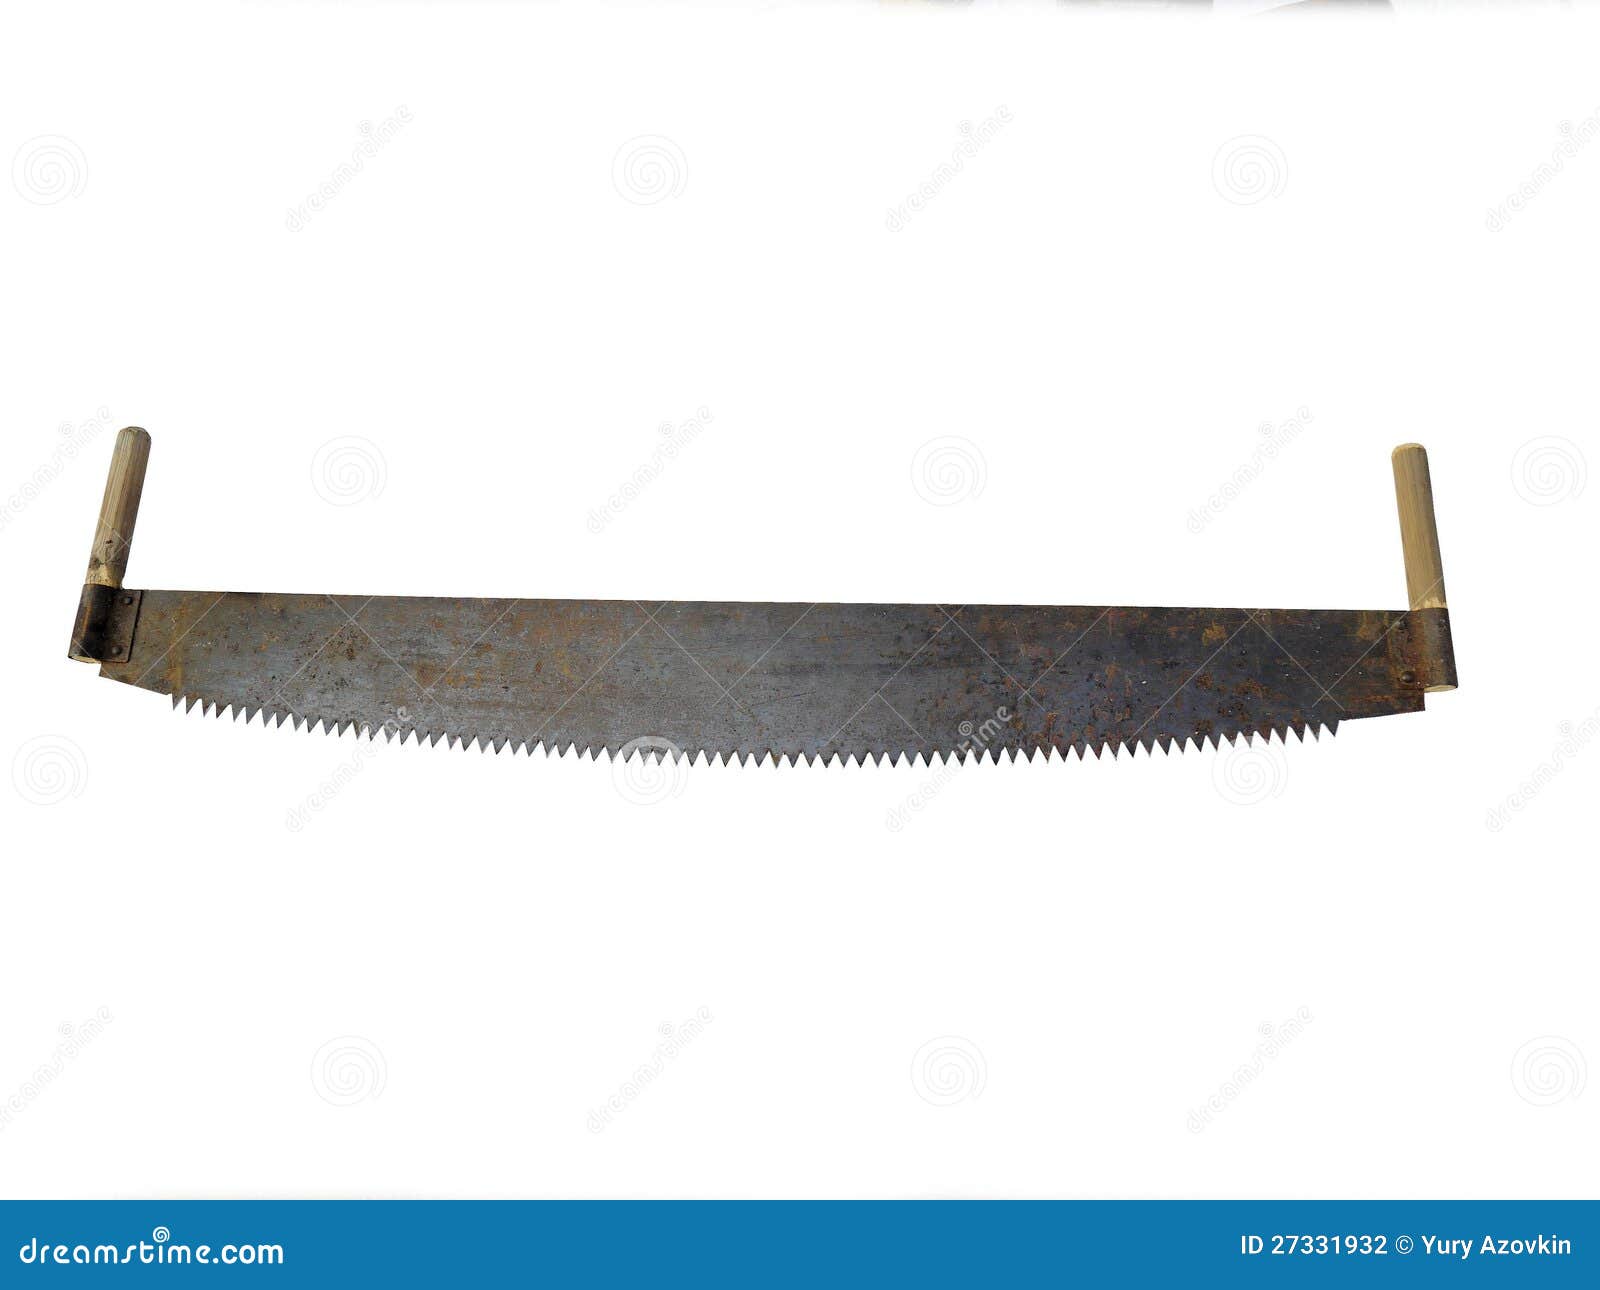  Two  handed Saw  Stock Photography Image 27331932